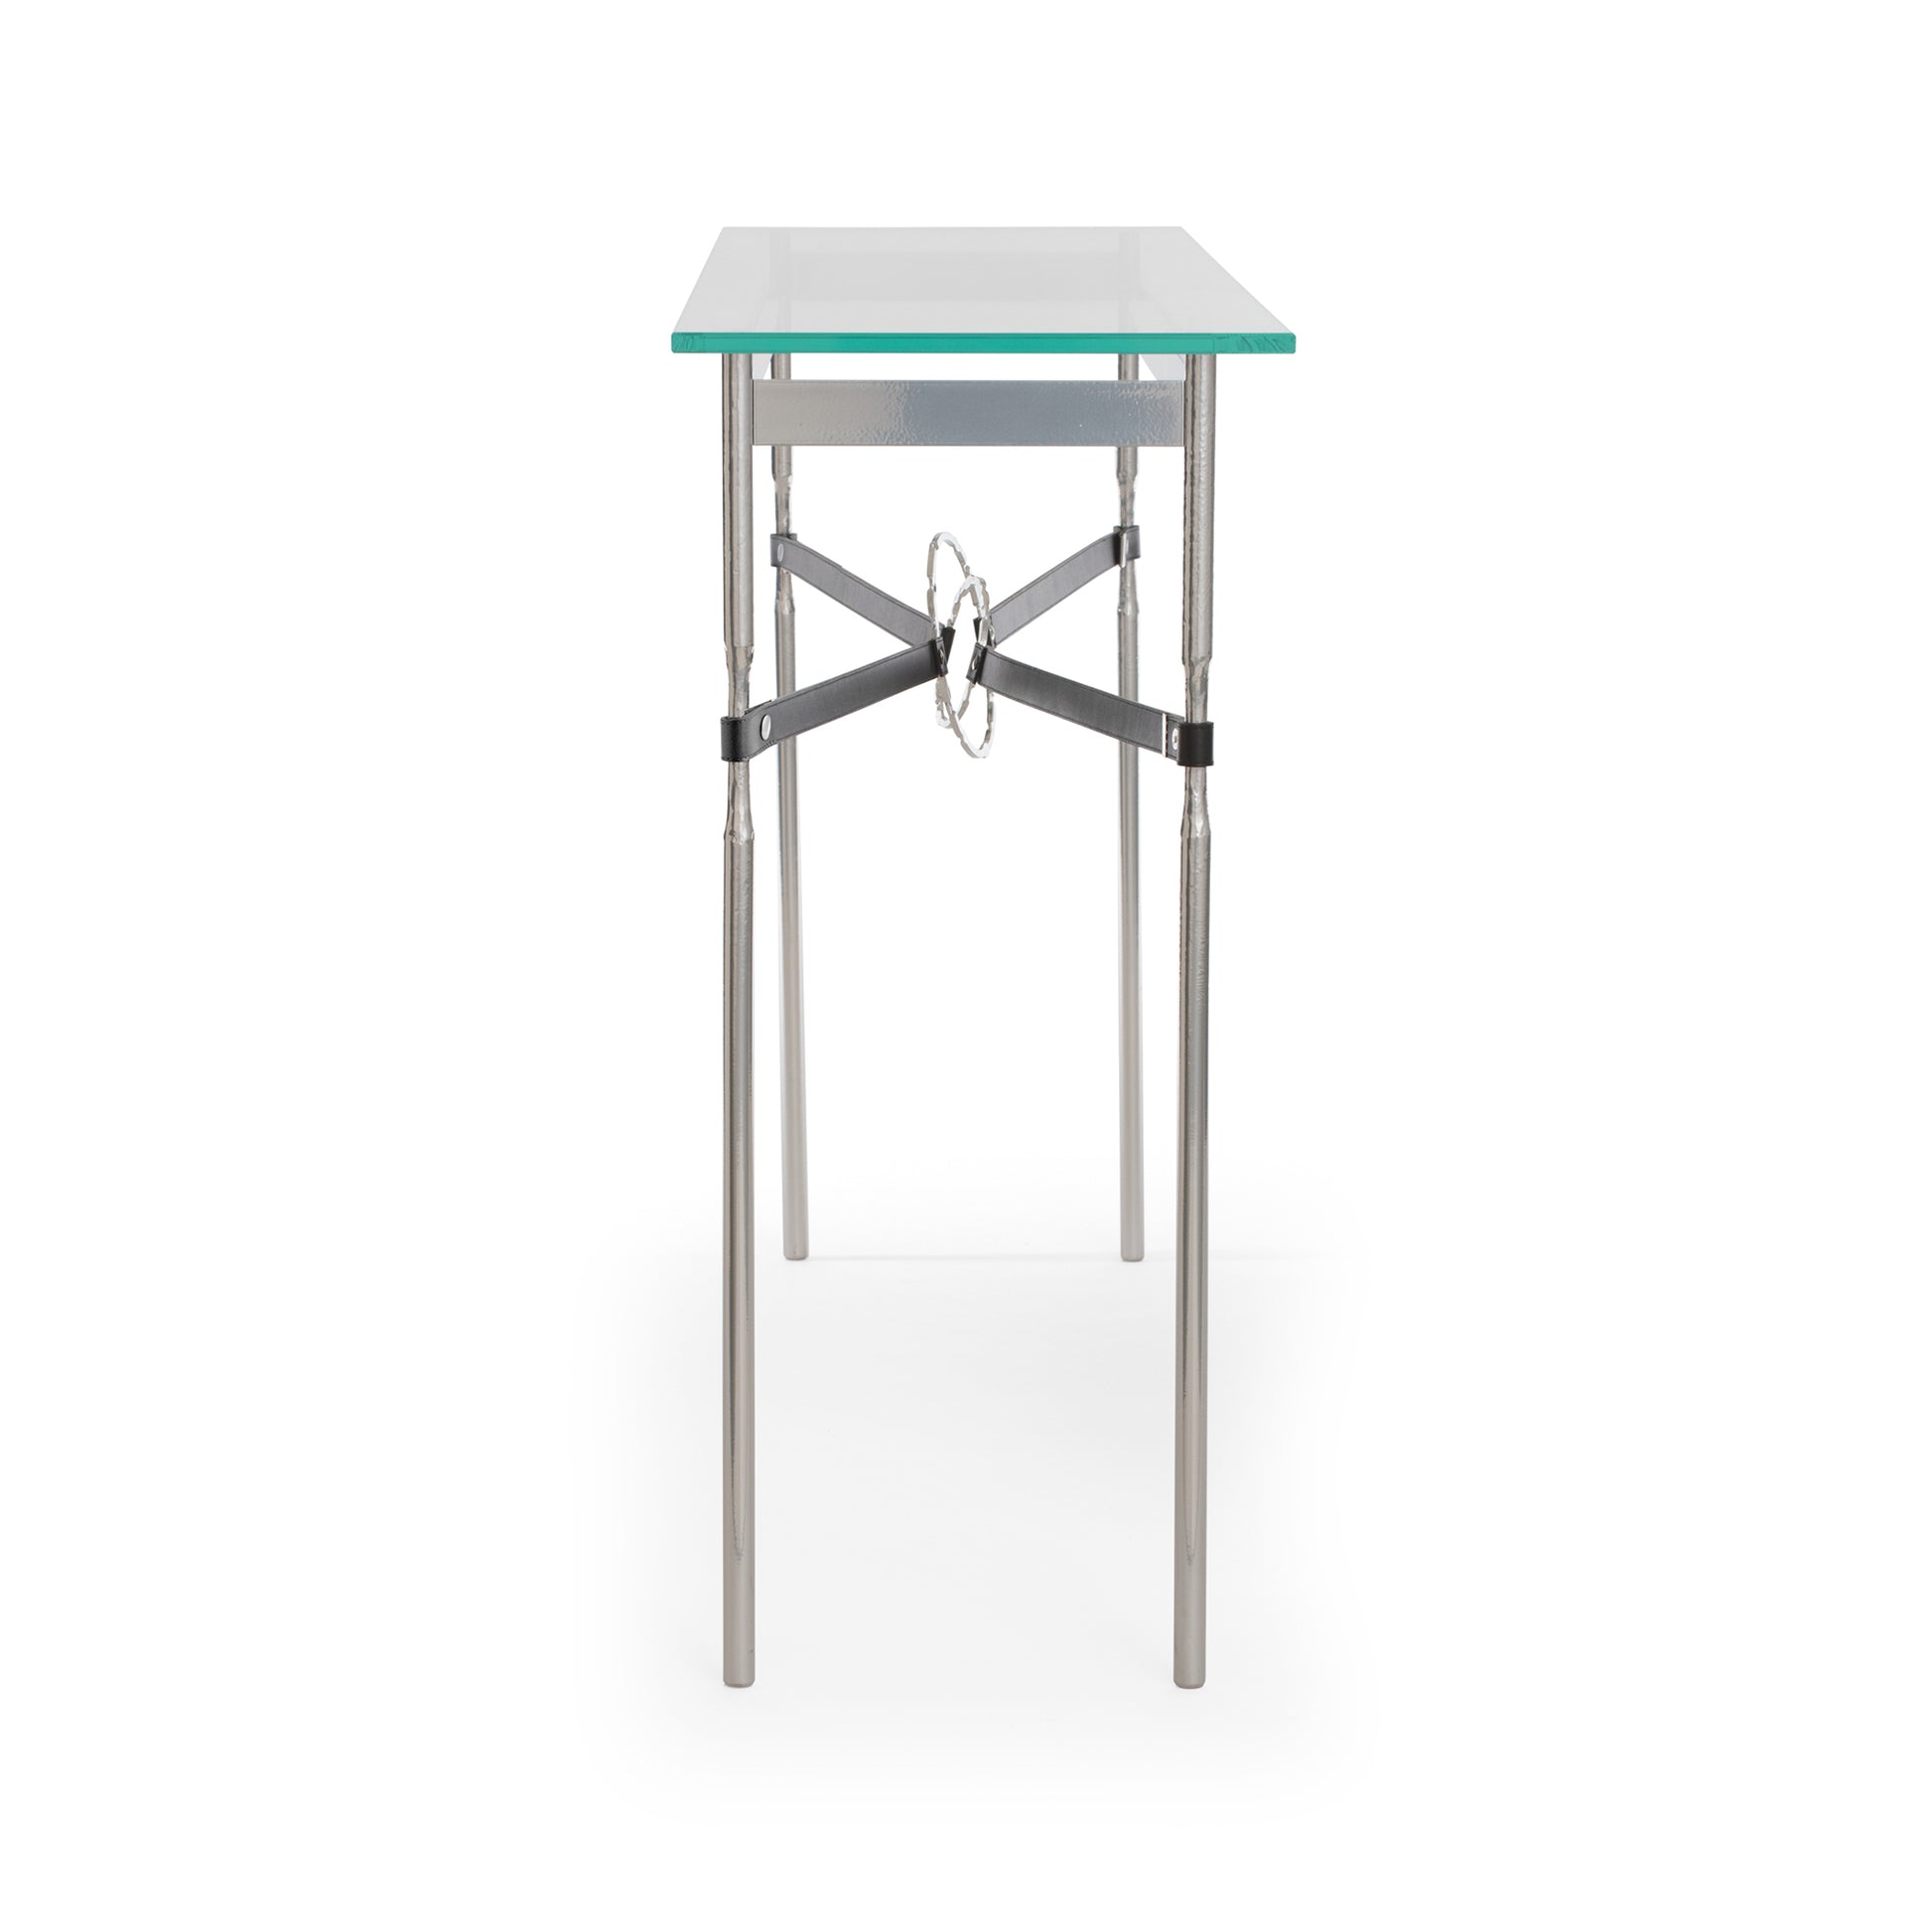 An Equus Console Table by Hubbardton Forge with metal legs and a tempered glass top.